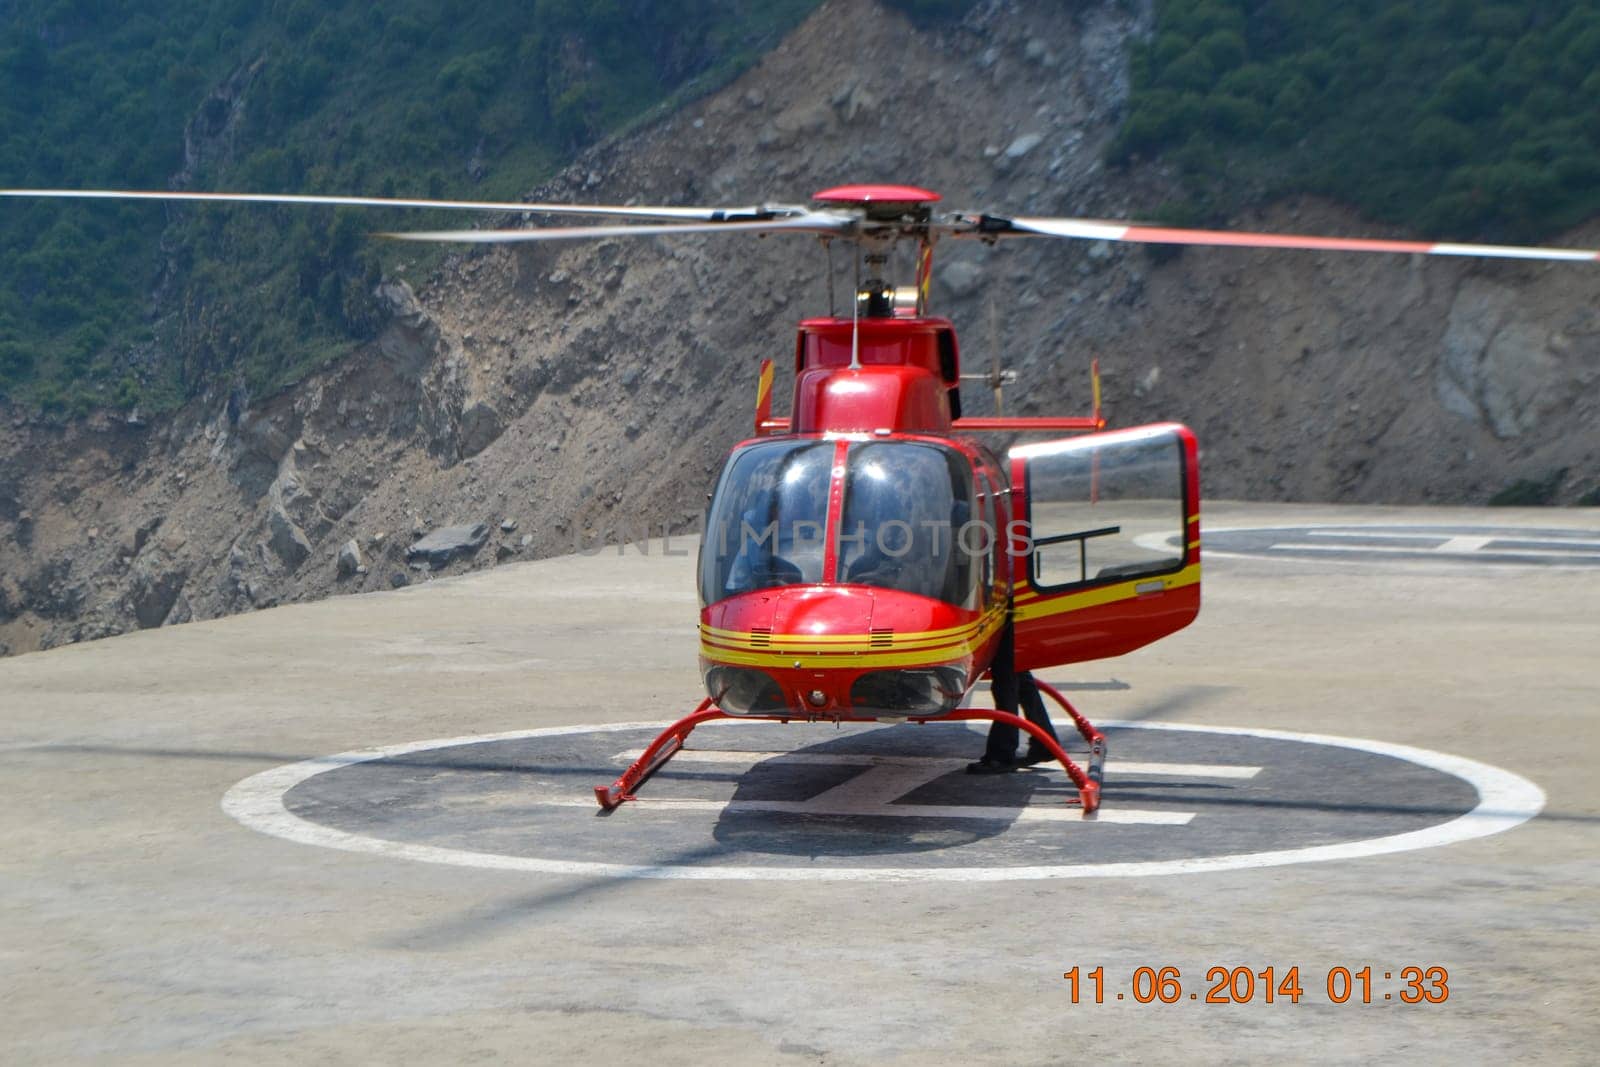 A helicopter landed on the helipad in India. A helicopter is a type of rotorcraft in which lift and thrust are supplied by horizontally-spinning rotors.